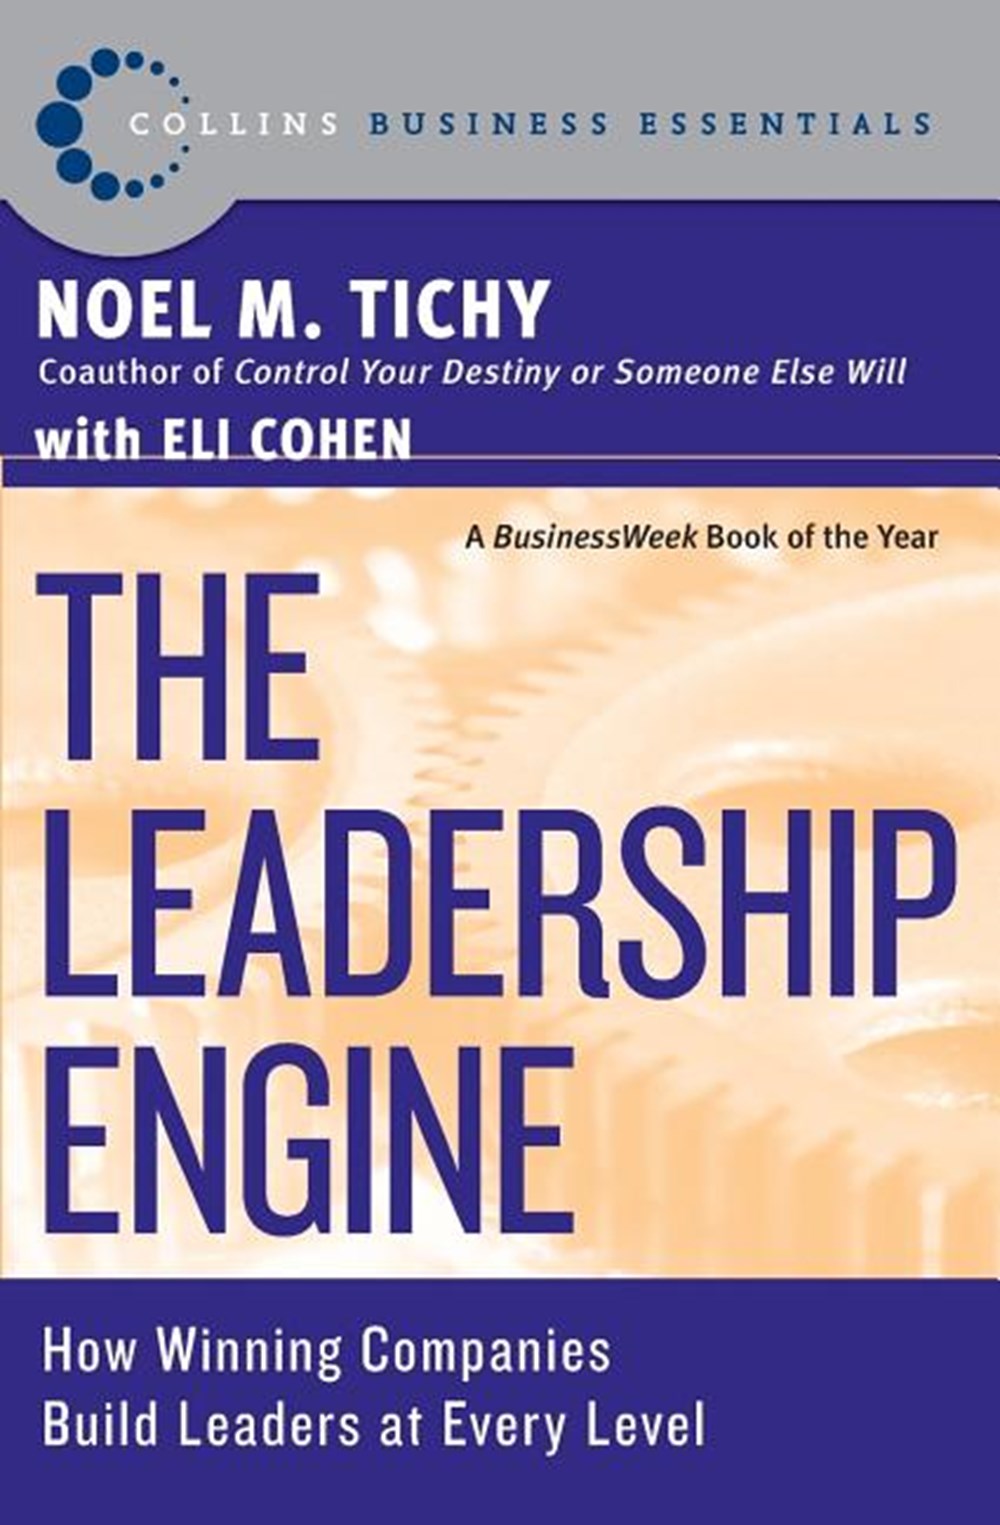 Leadership Engine: How Winning Companies Build Leaders at Every Level (Revised)